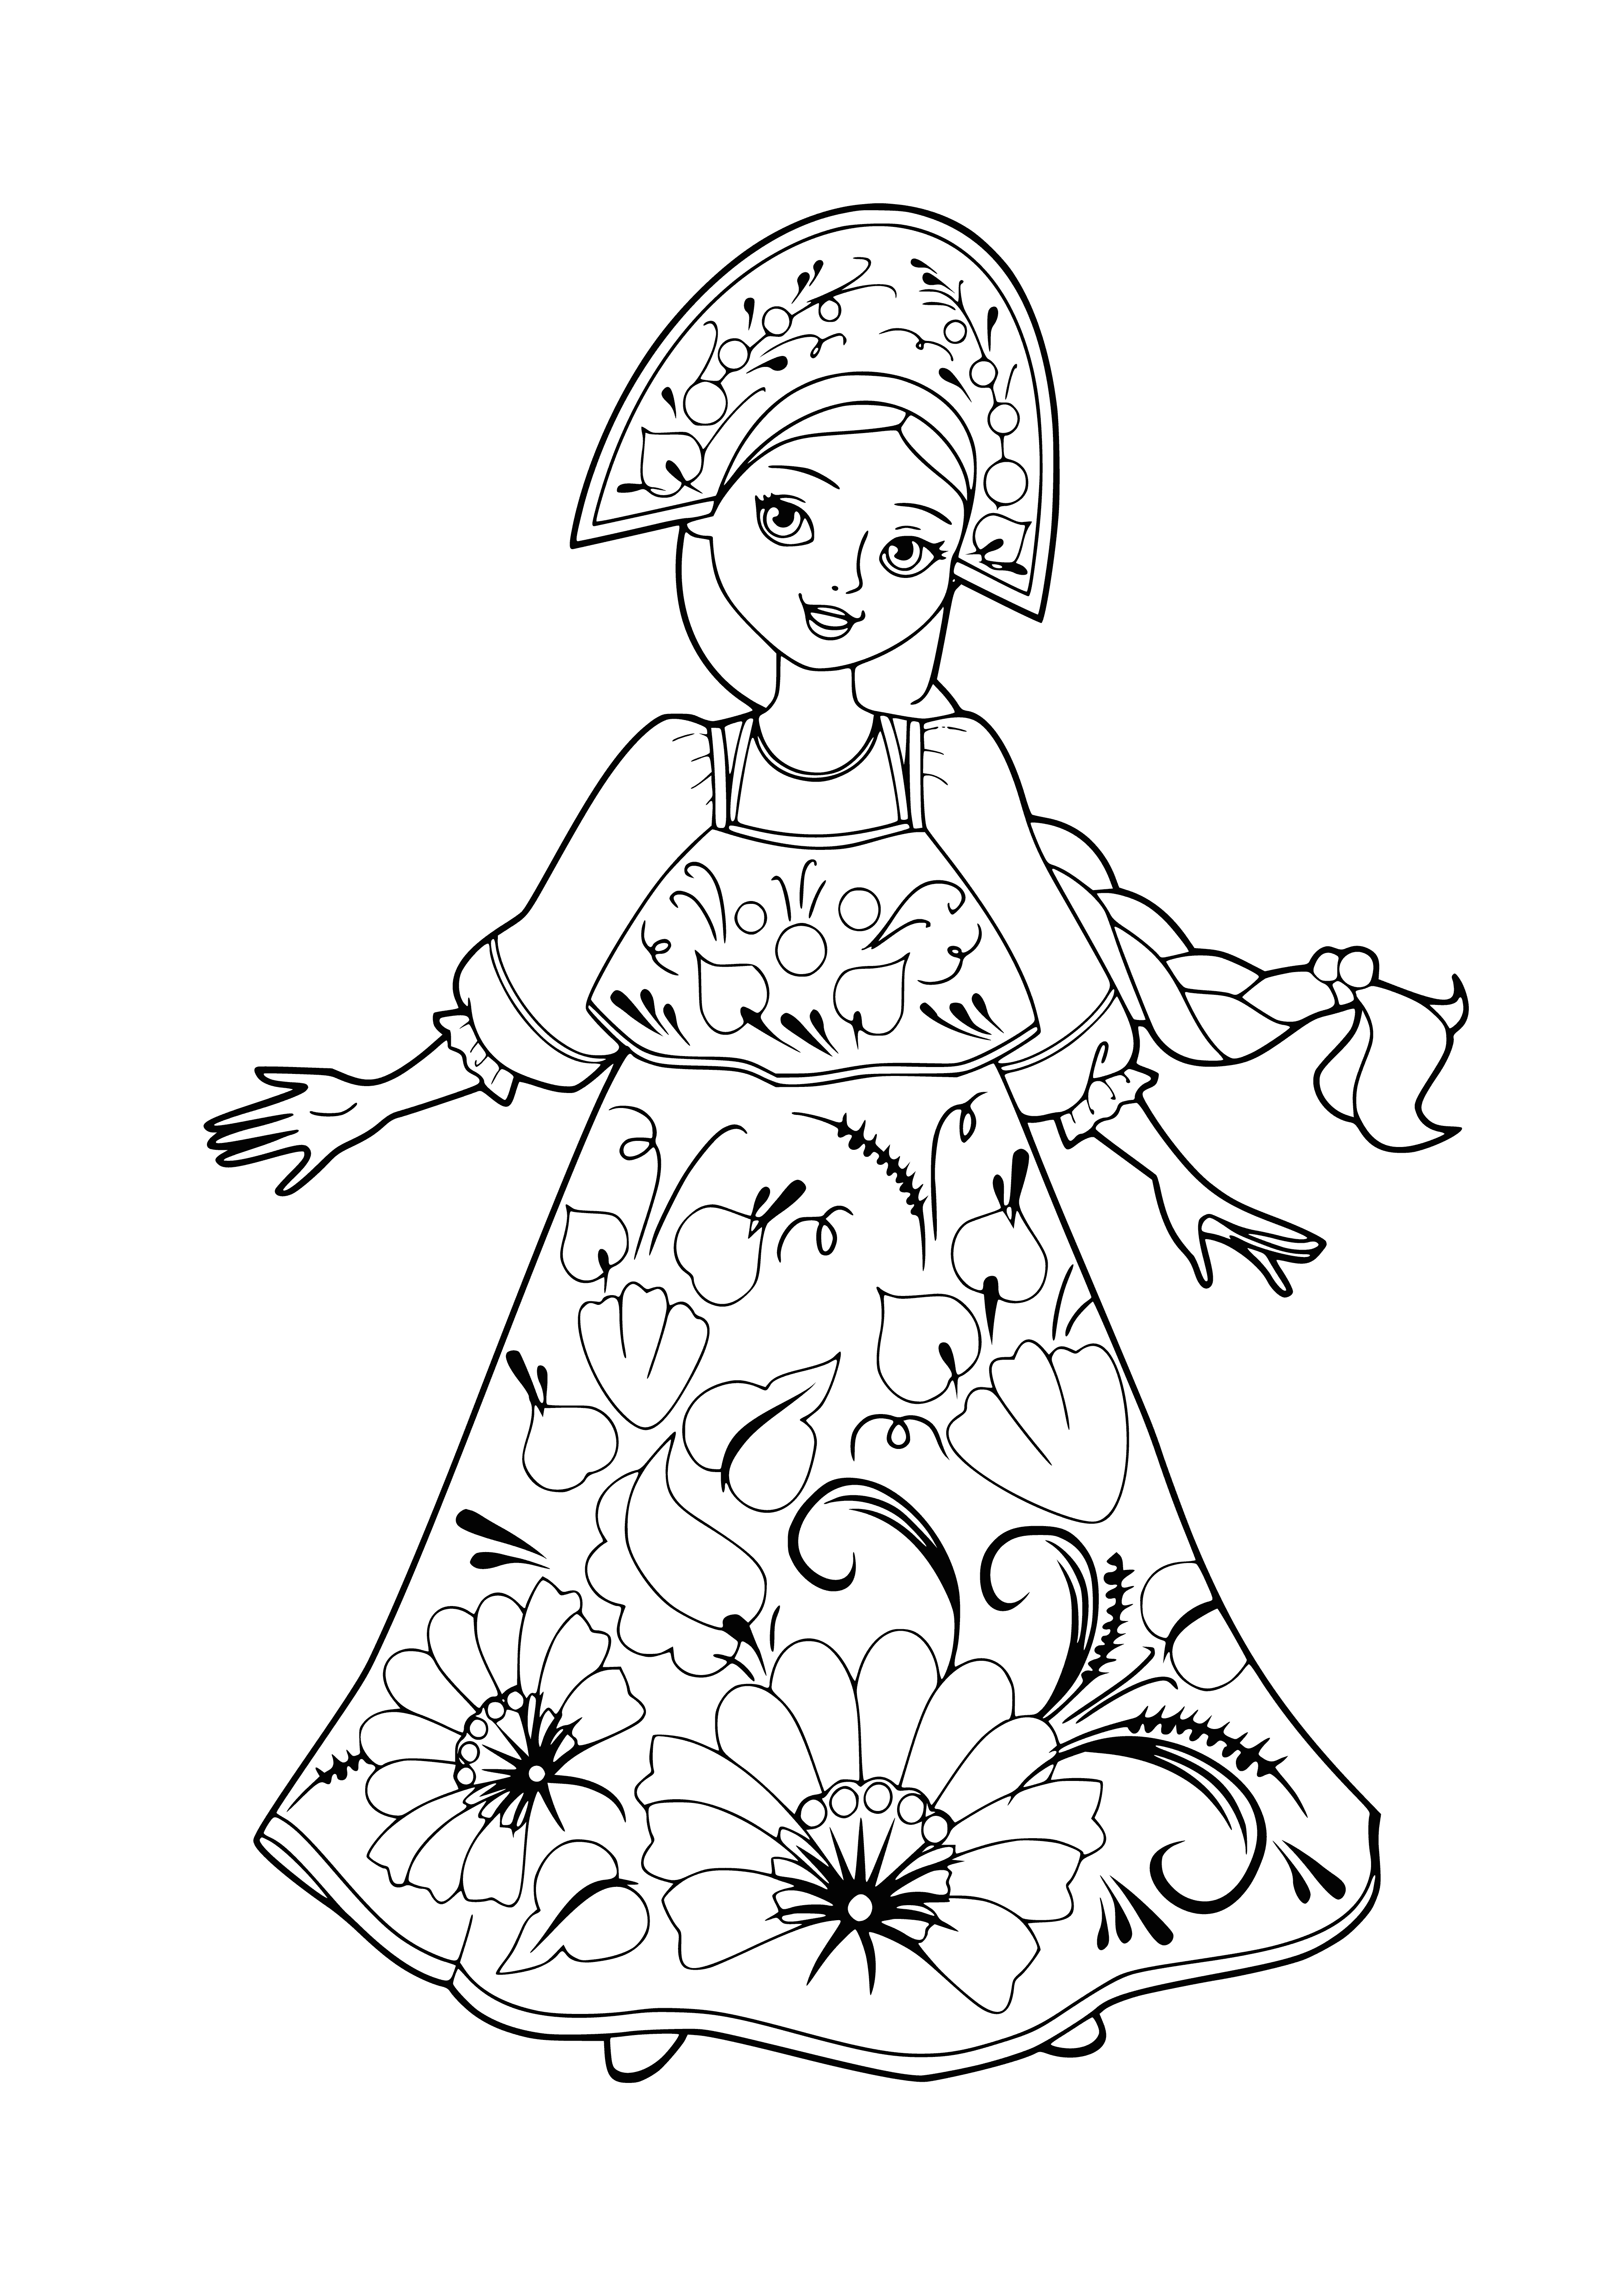 Outfits of Russian beauties coloring page